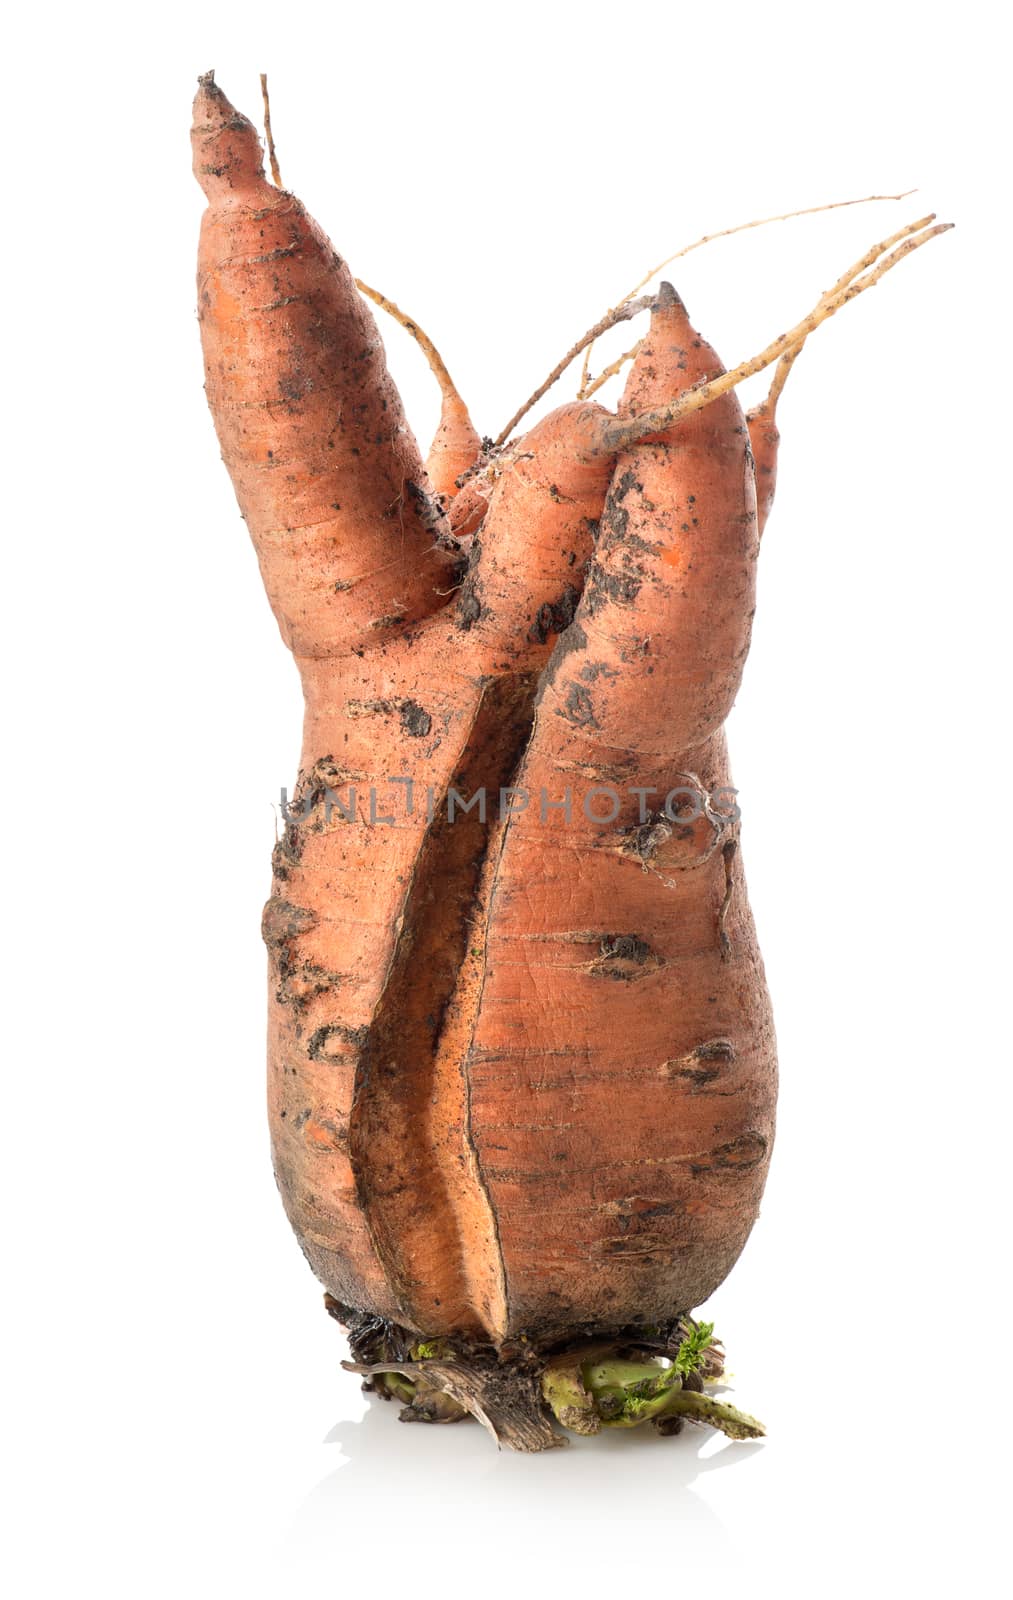 Carrot of unusual form isolated on a white background